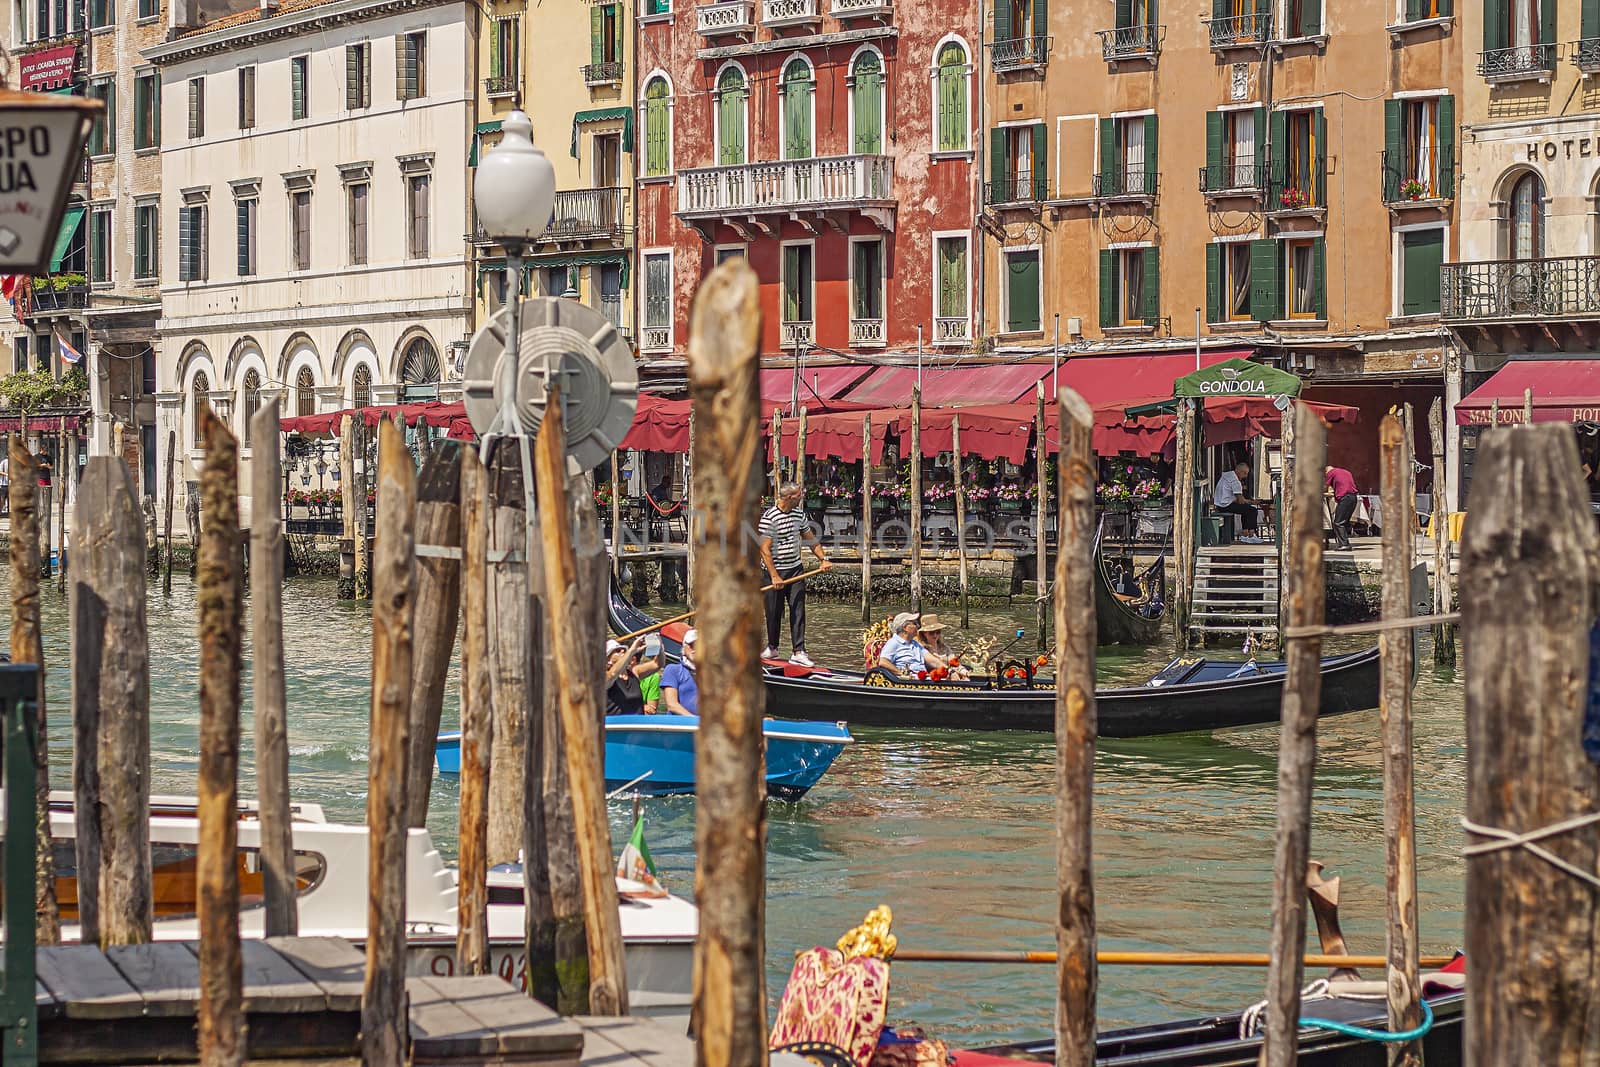 VENICE, ITALY 2 JULY 2020: Canal grande landscape with boats and gondolas in Venice